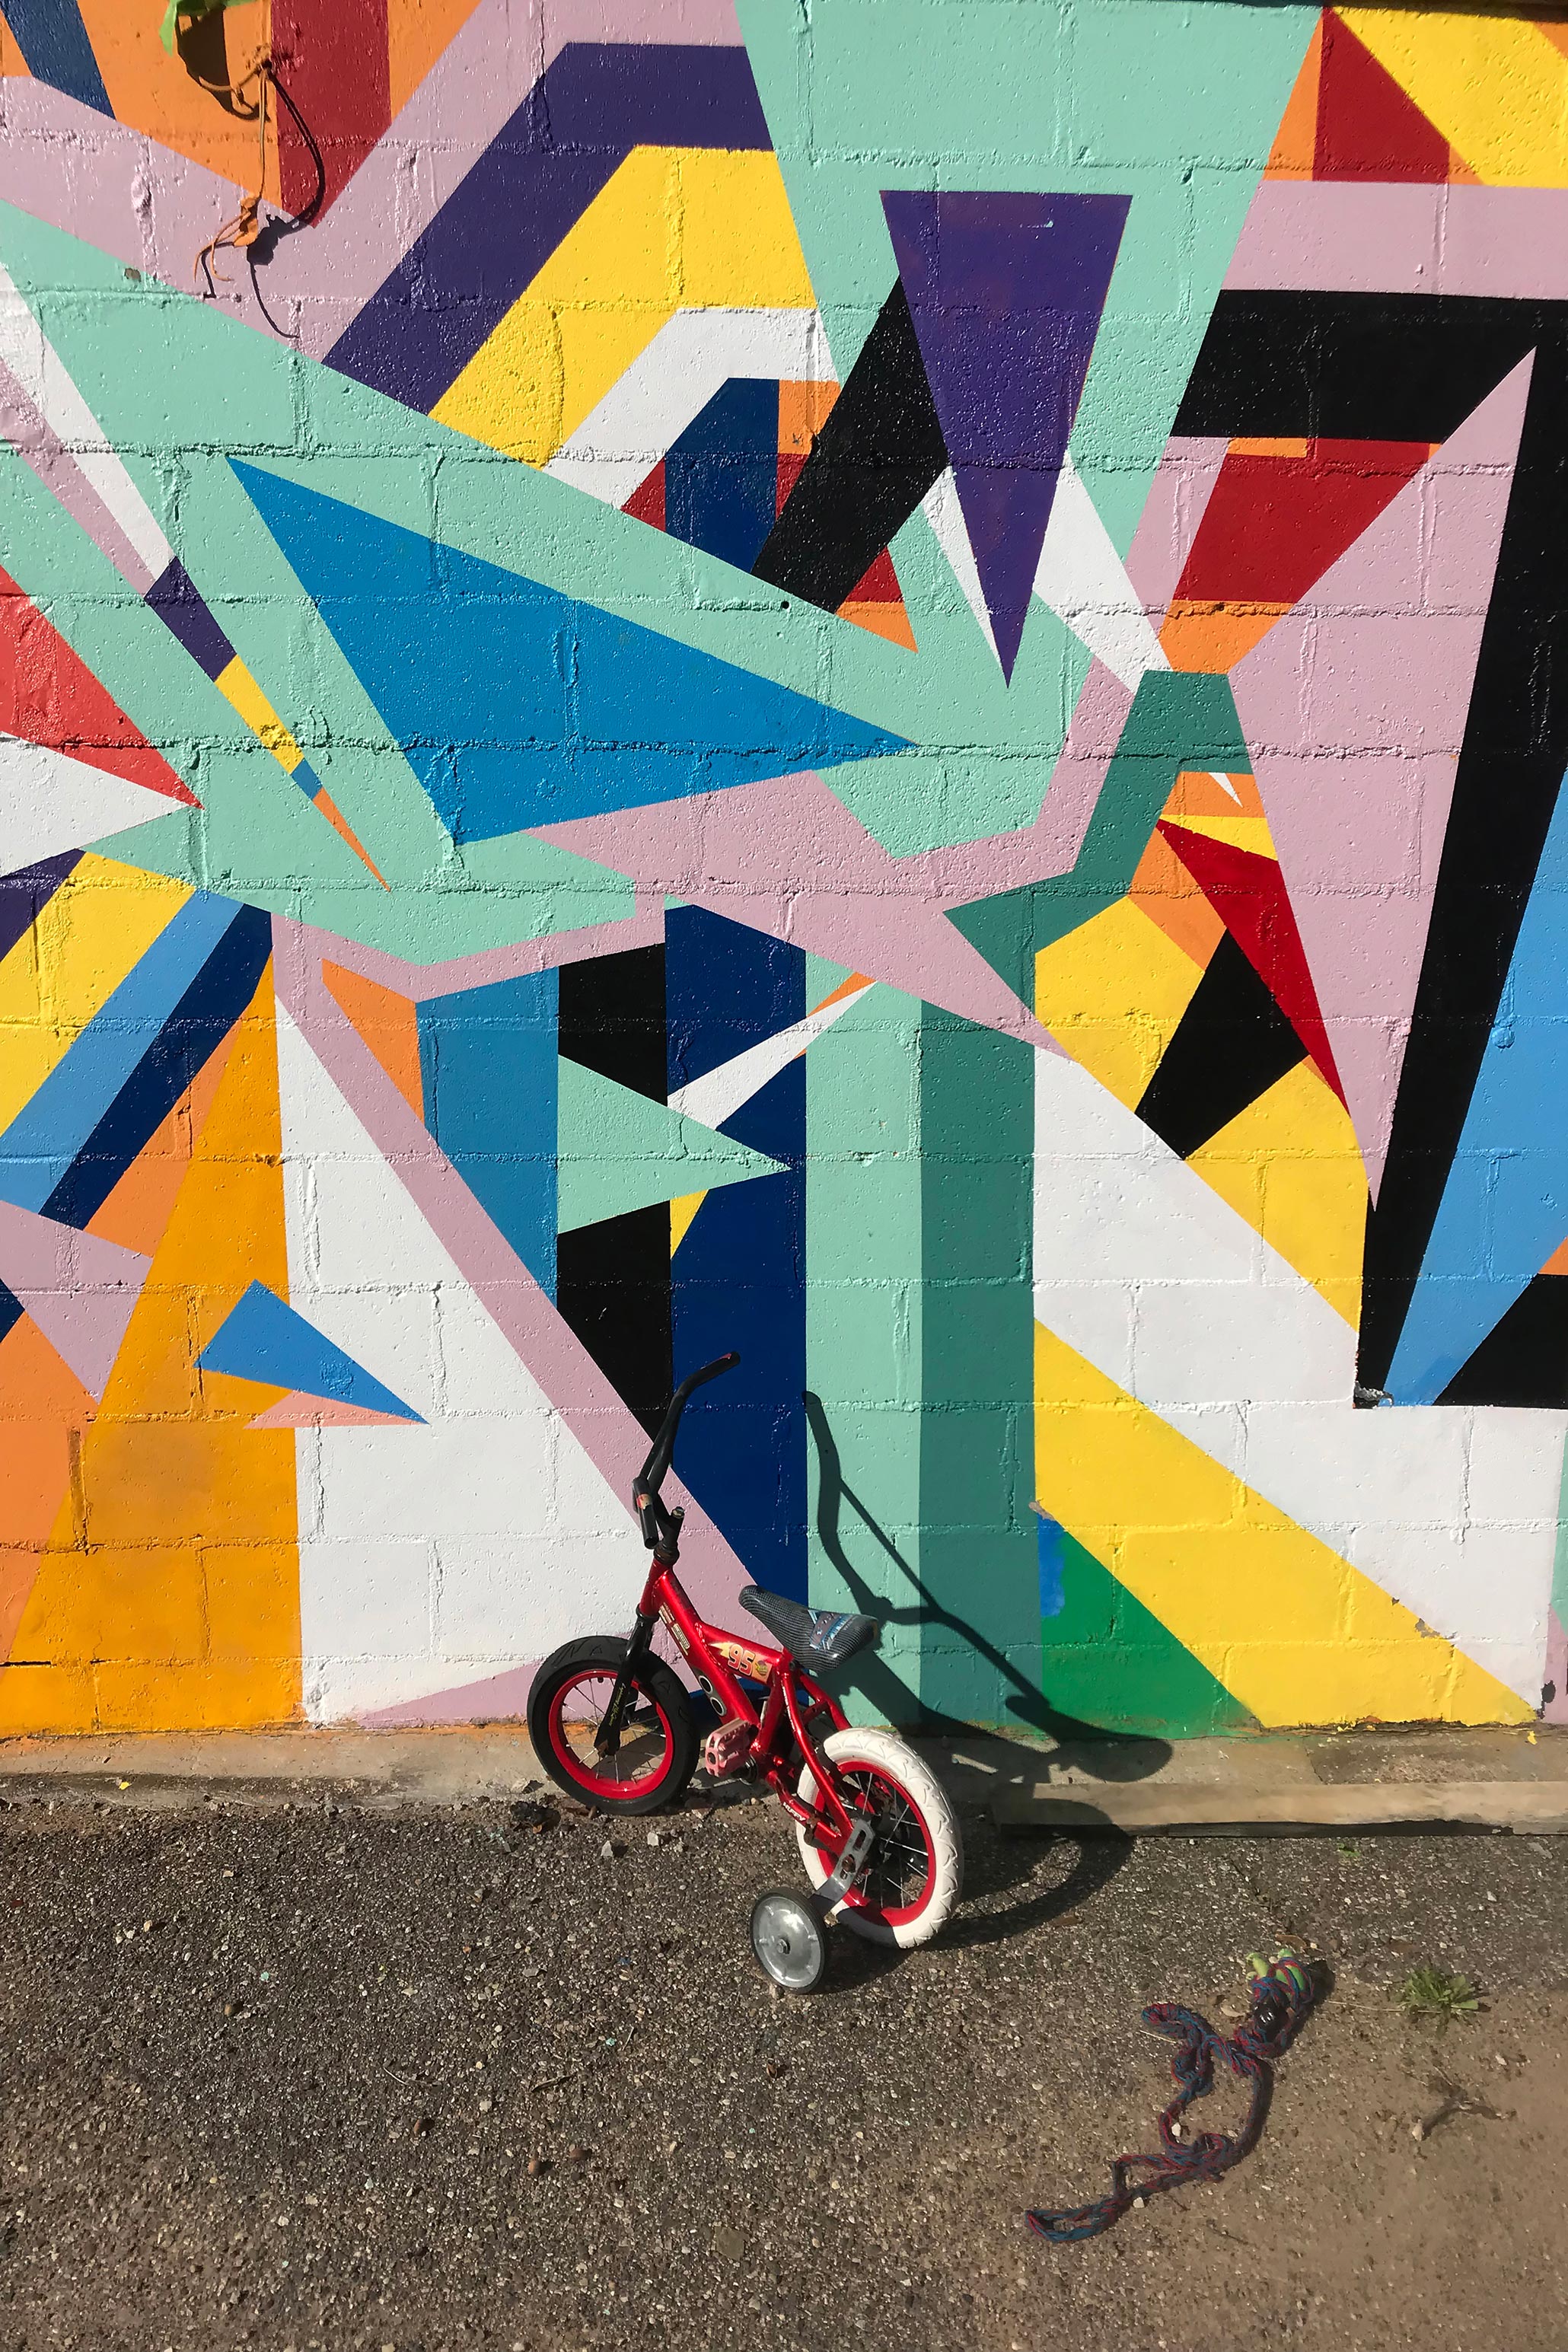 Mural and bicycle by Daren Hill.